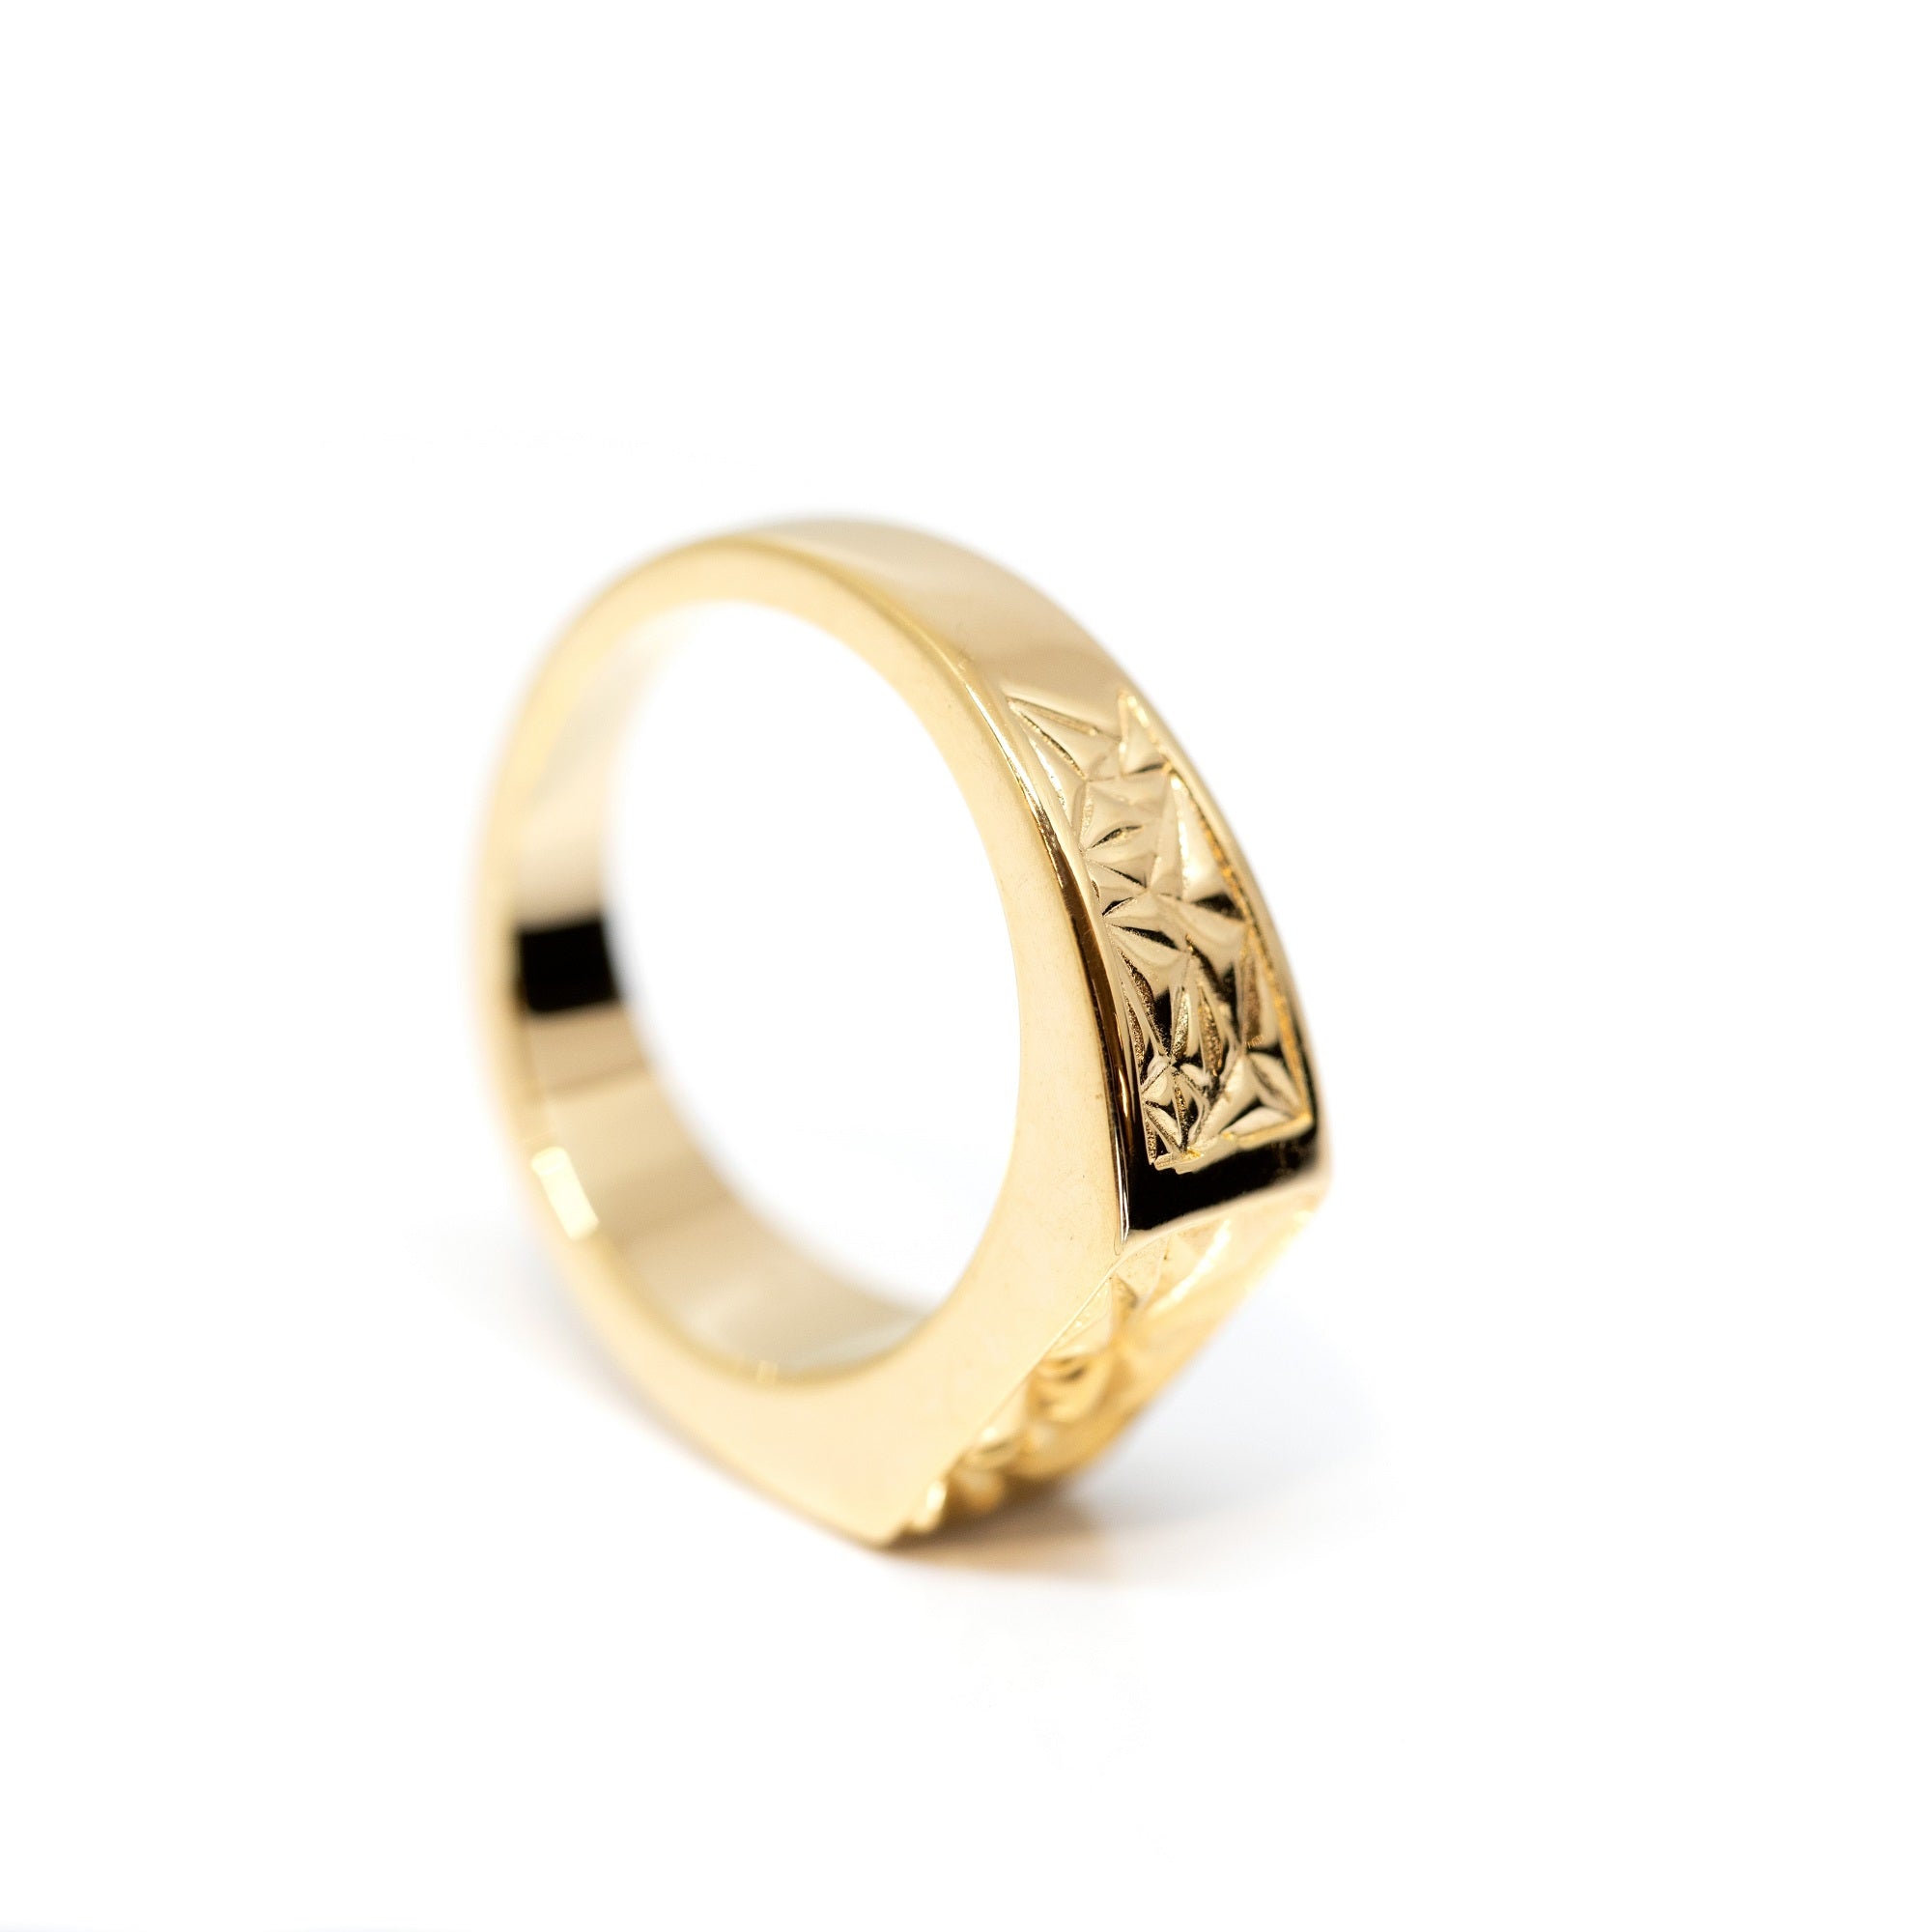 yellow gold men ring edgy design custom made in montreal by bena jewelry on a white background